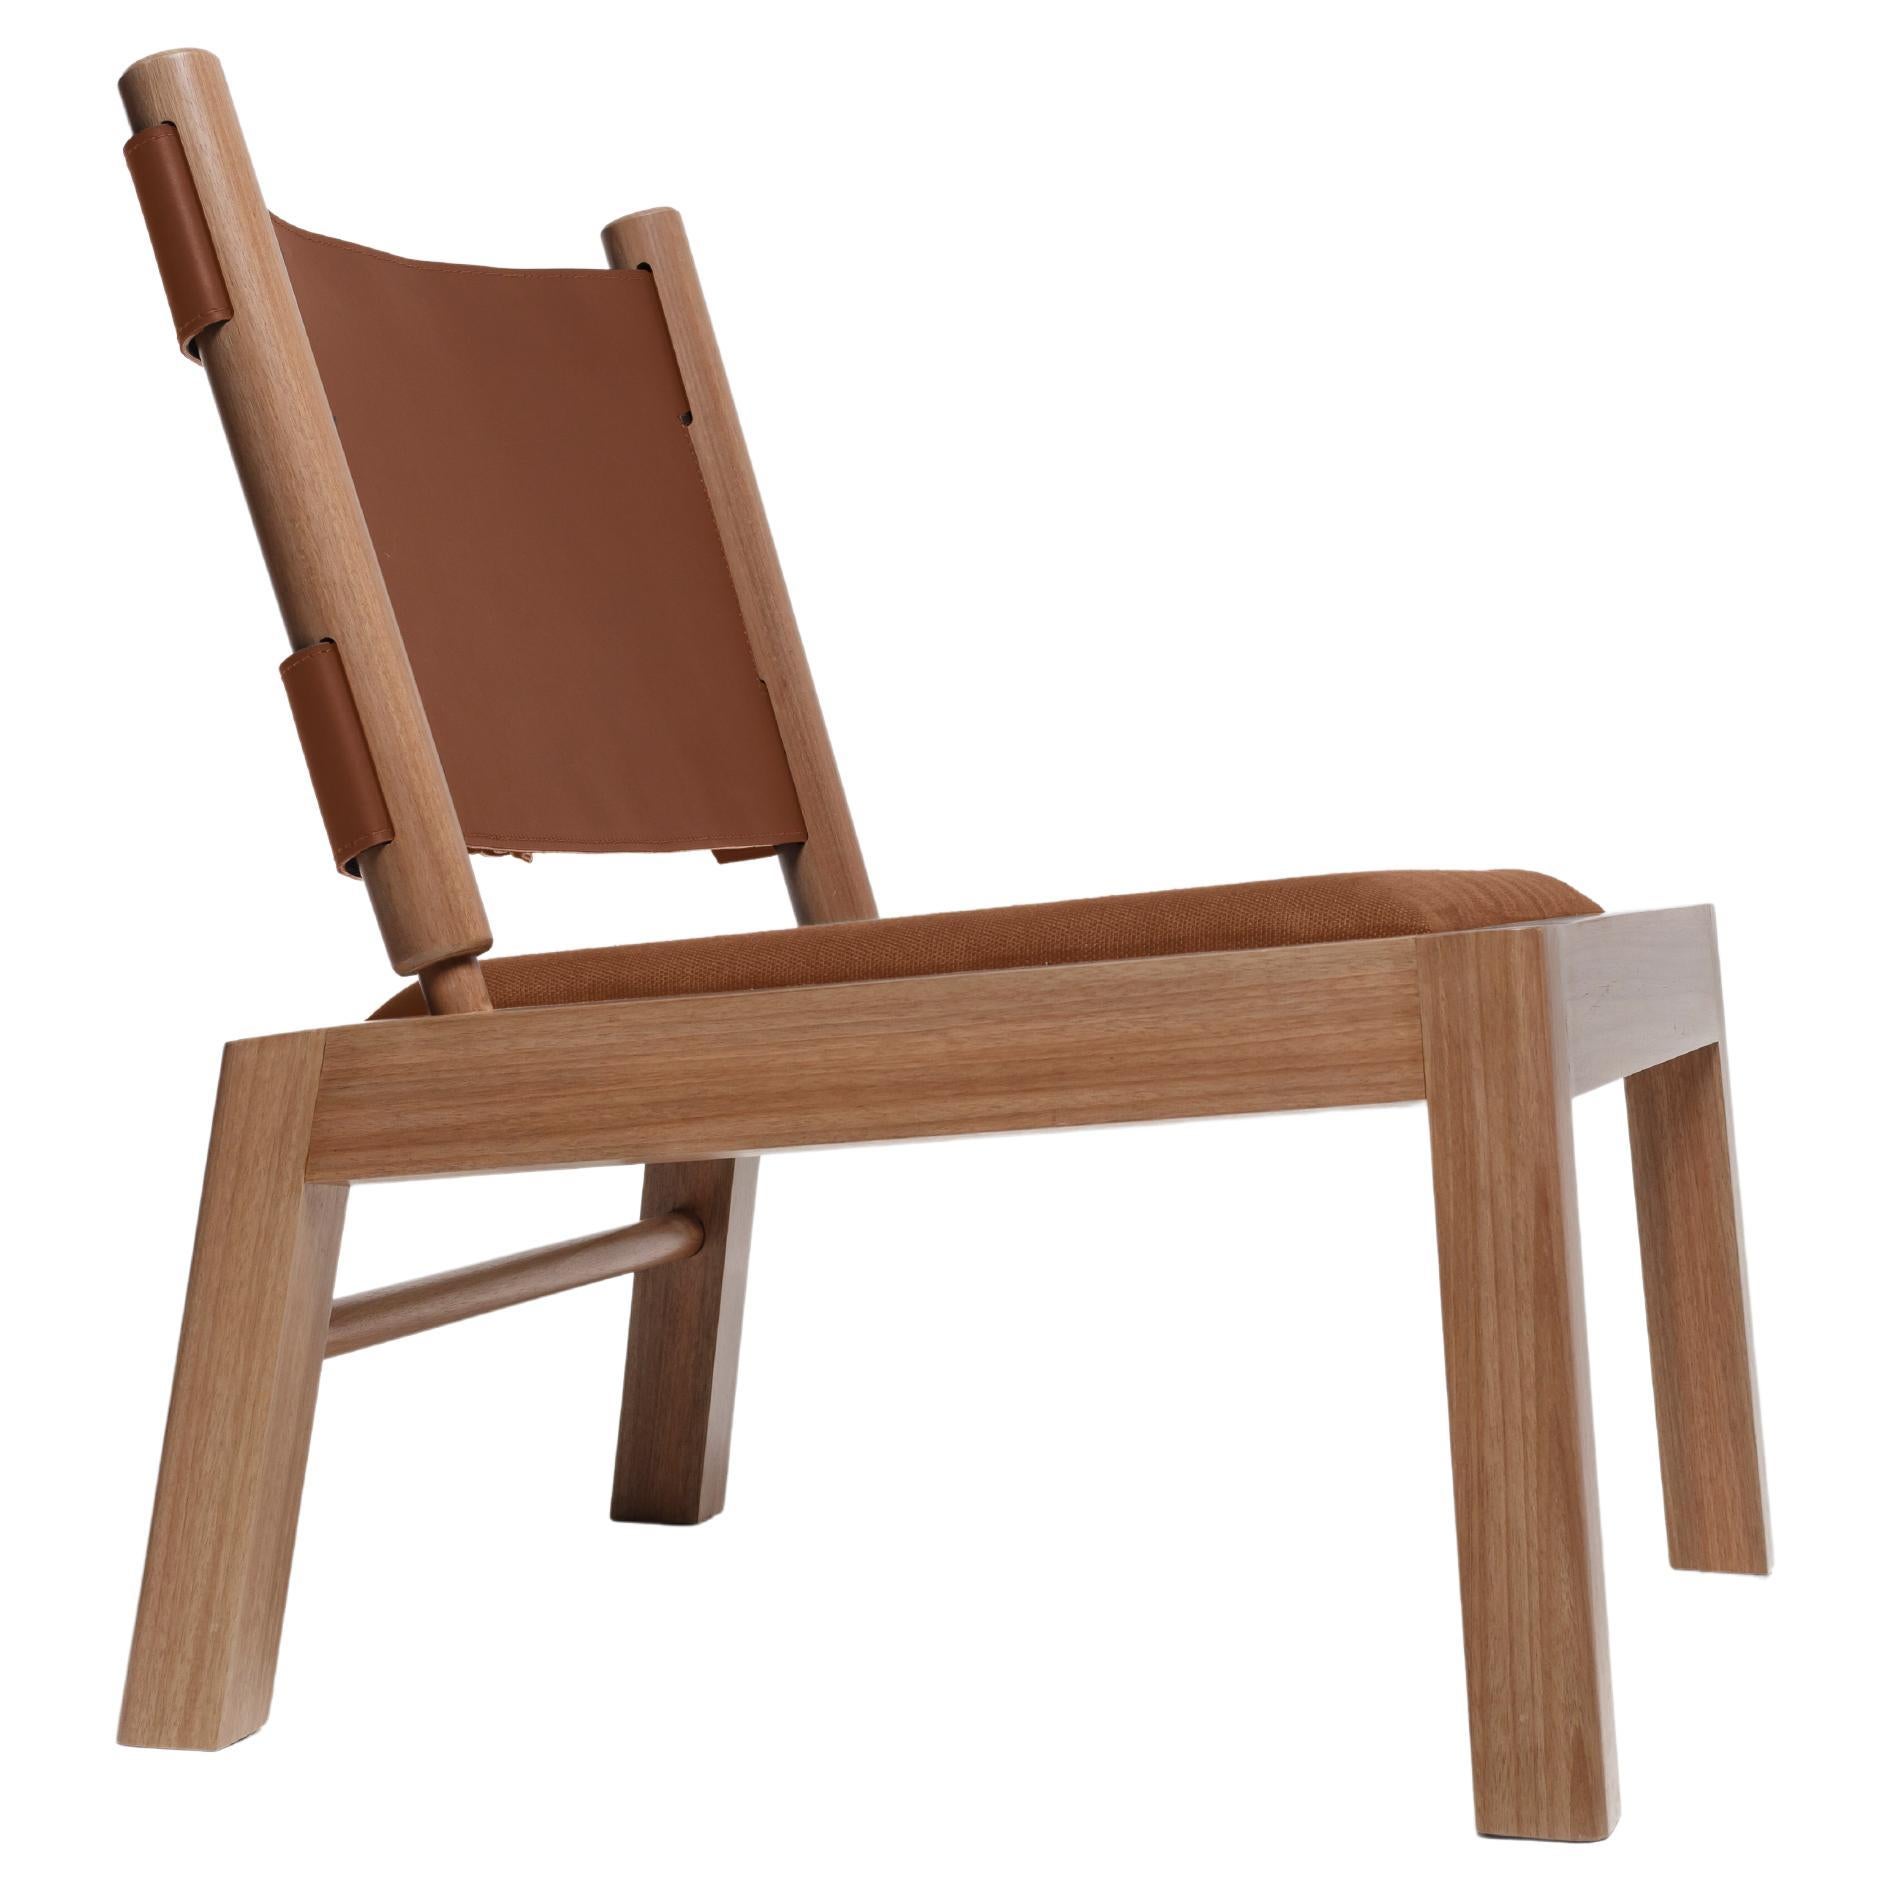 Oulipo Lounge Chair, Leder Sling Chair Contemporary Handcrafted Furniture 